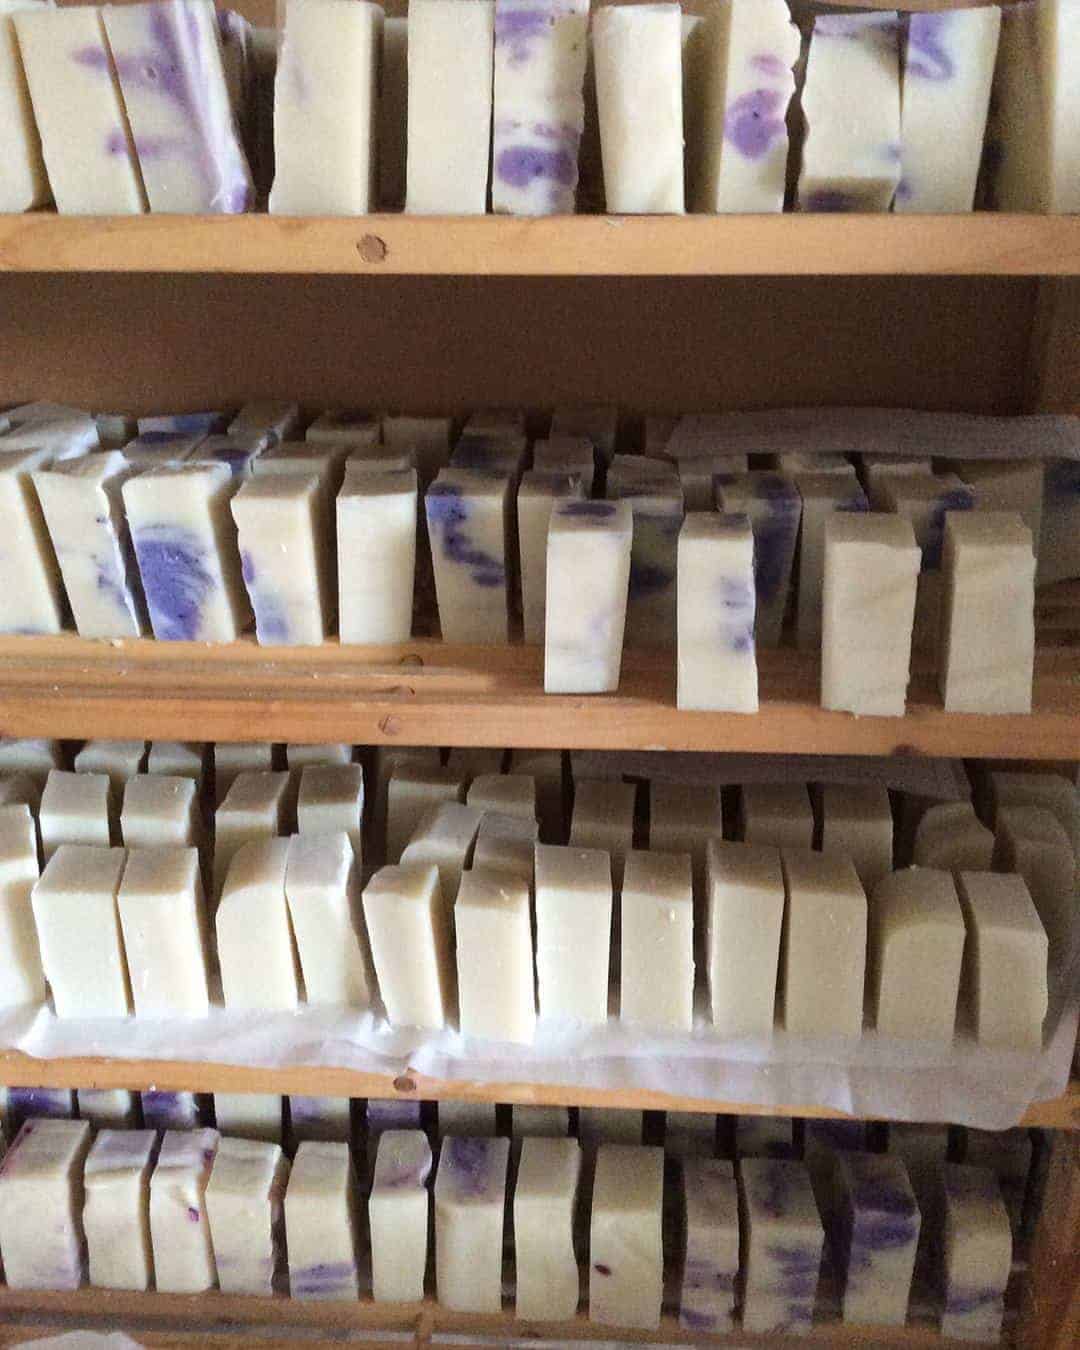 the finished lavender soap